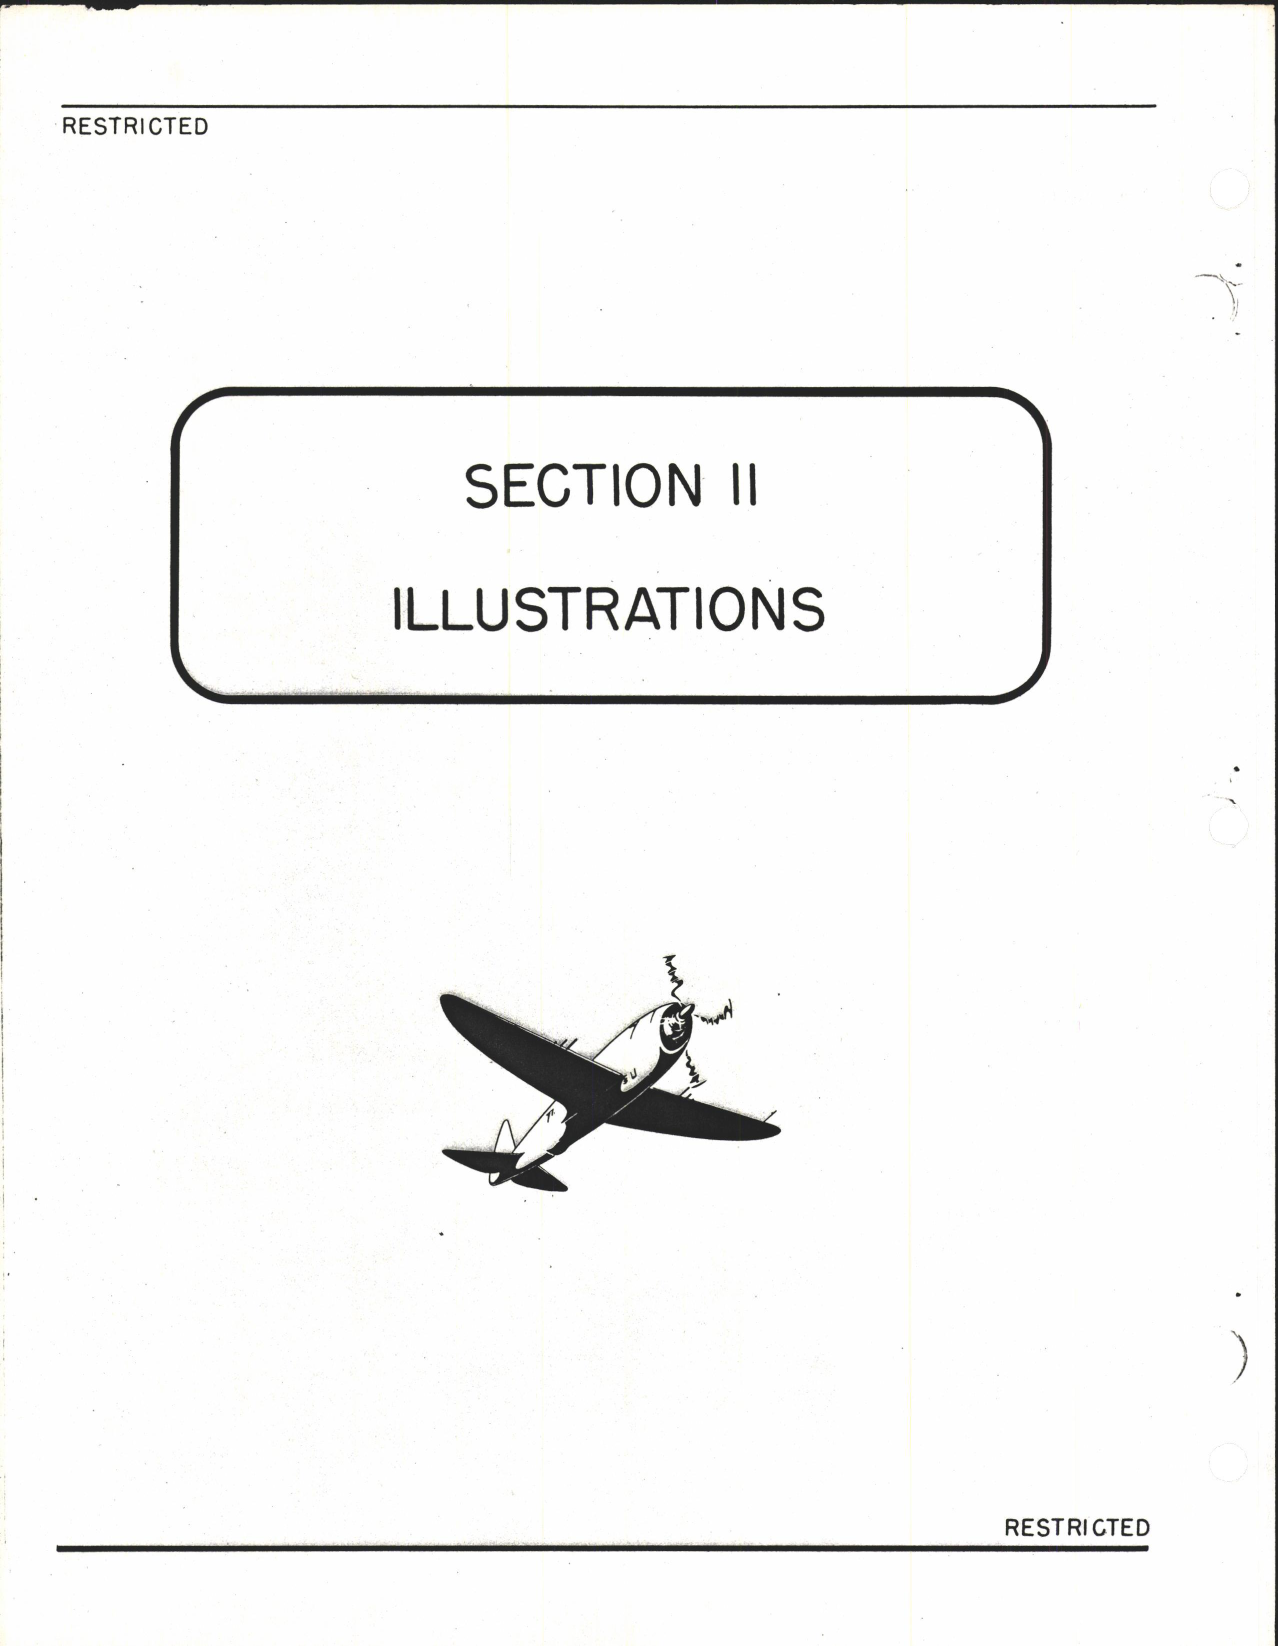 Sample page 8 from AirCorps Library document: Parts Catalog for Model P-47 Airplanes